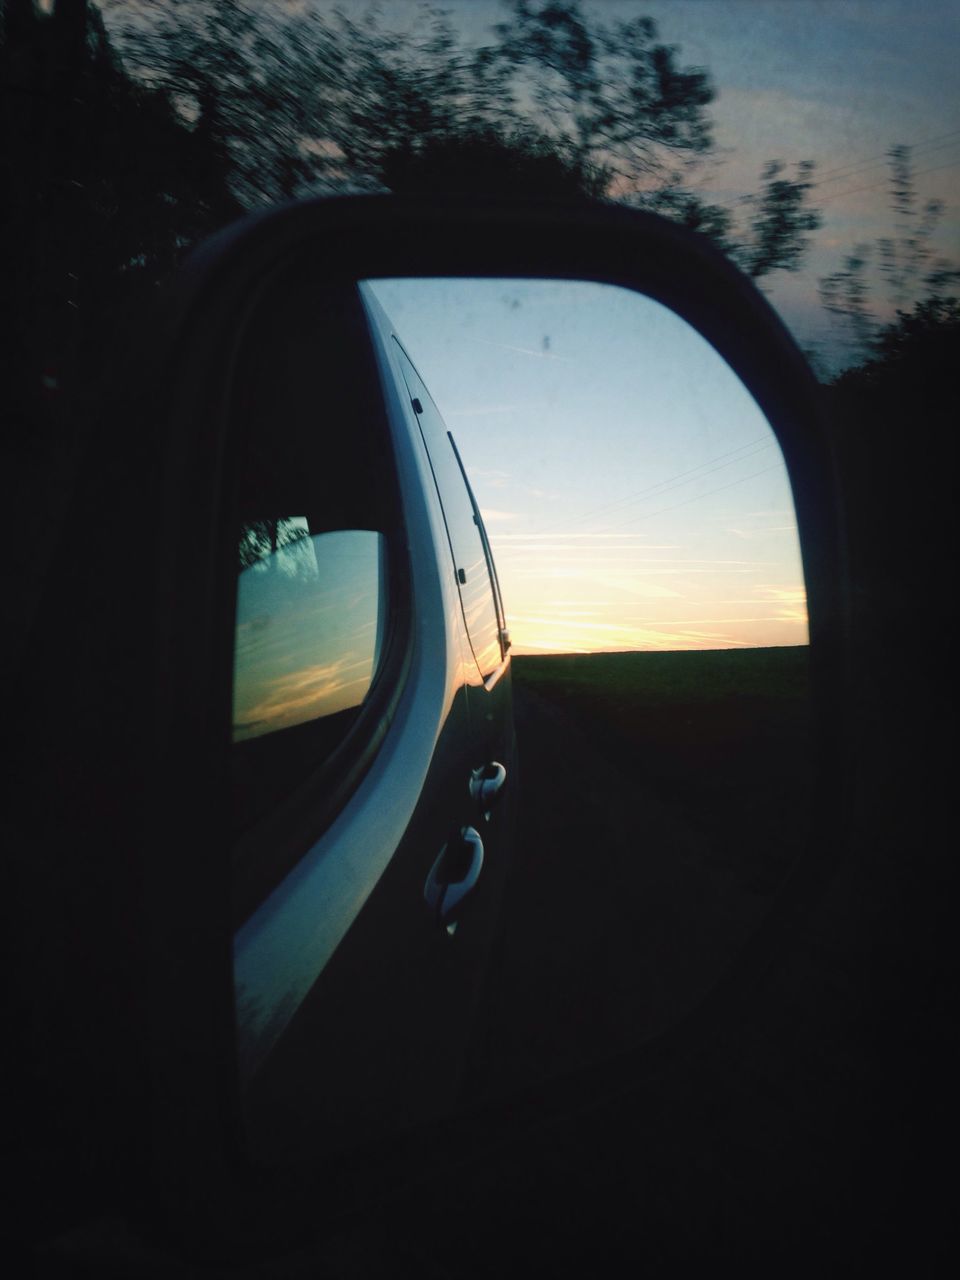 transportation, mode of transport, land vehicle, car, sunset, side-view mirror, reflection, sky, silhouette, road, travel, vehicle interior, car interior, on the move, street, part of, nature, glass - material, cropped, outdoors